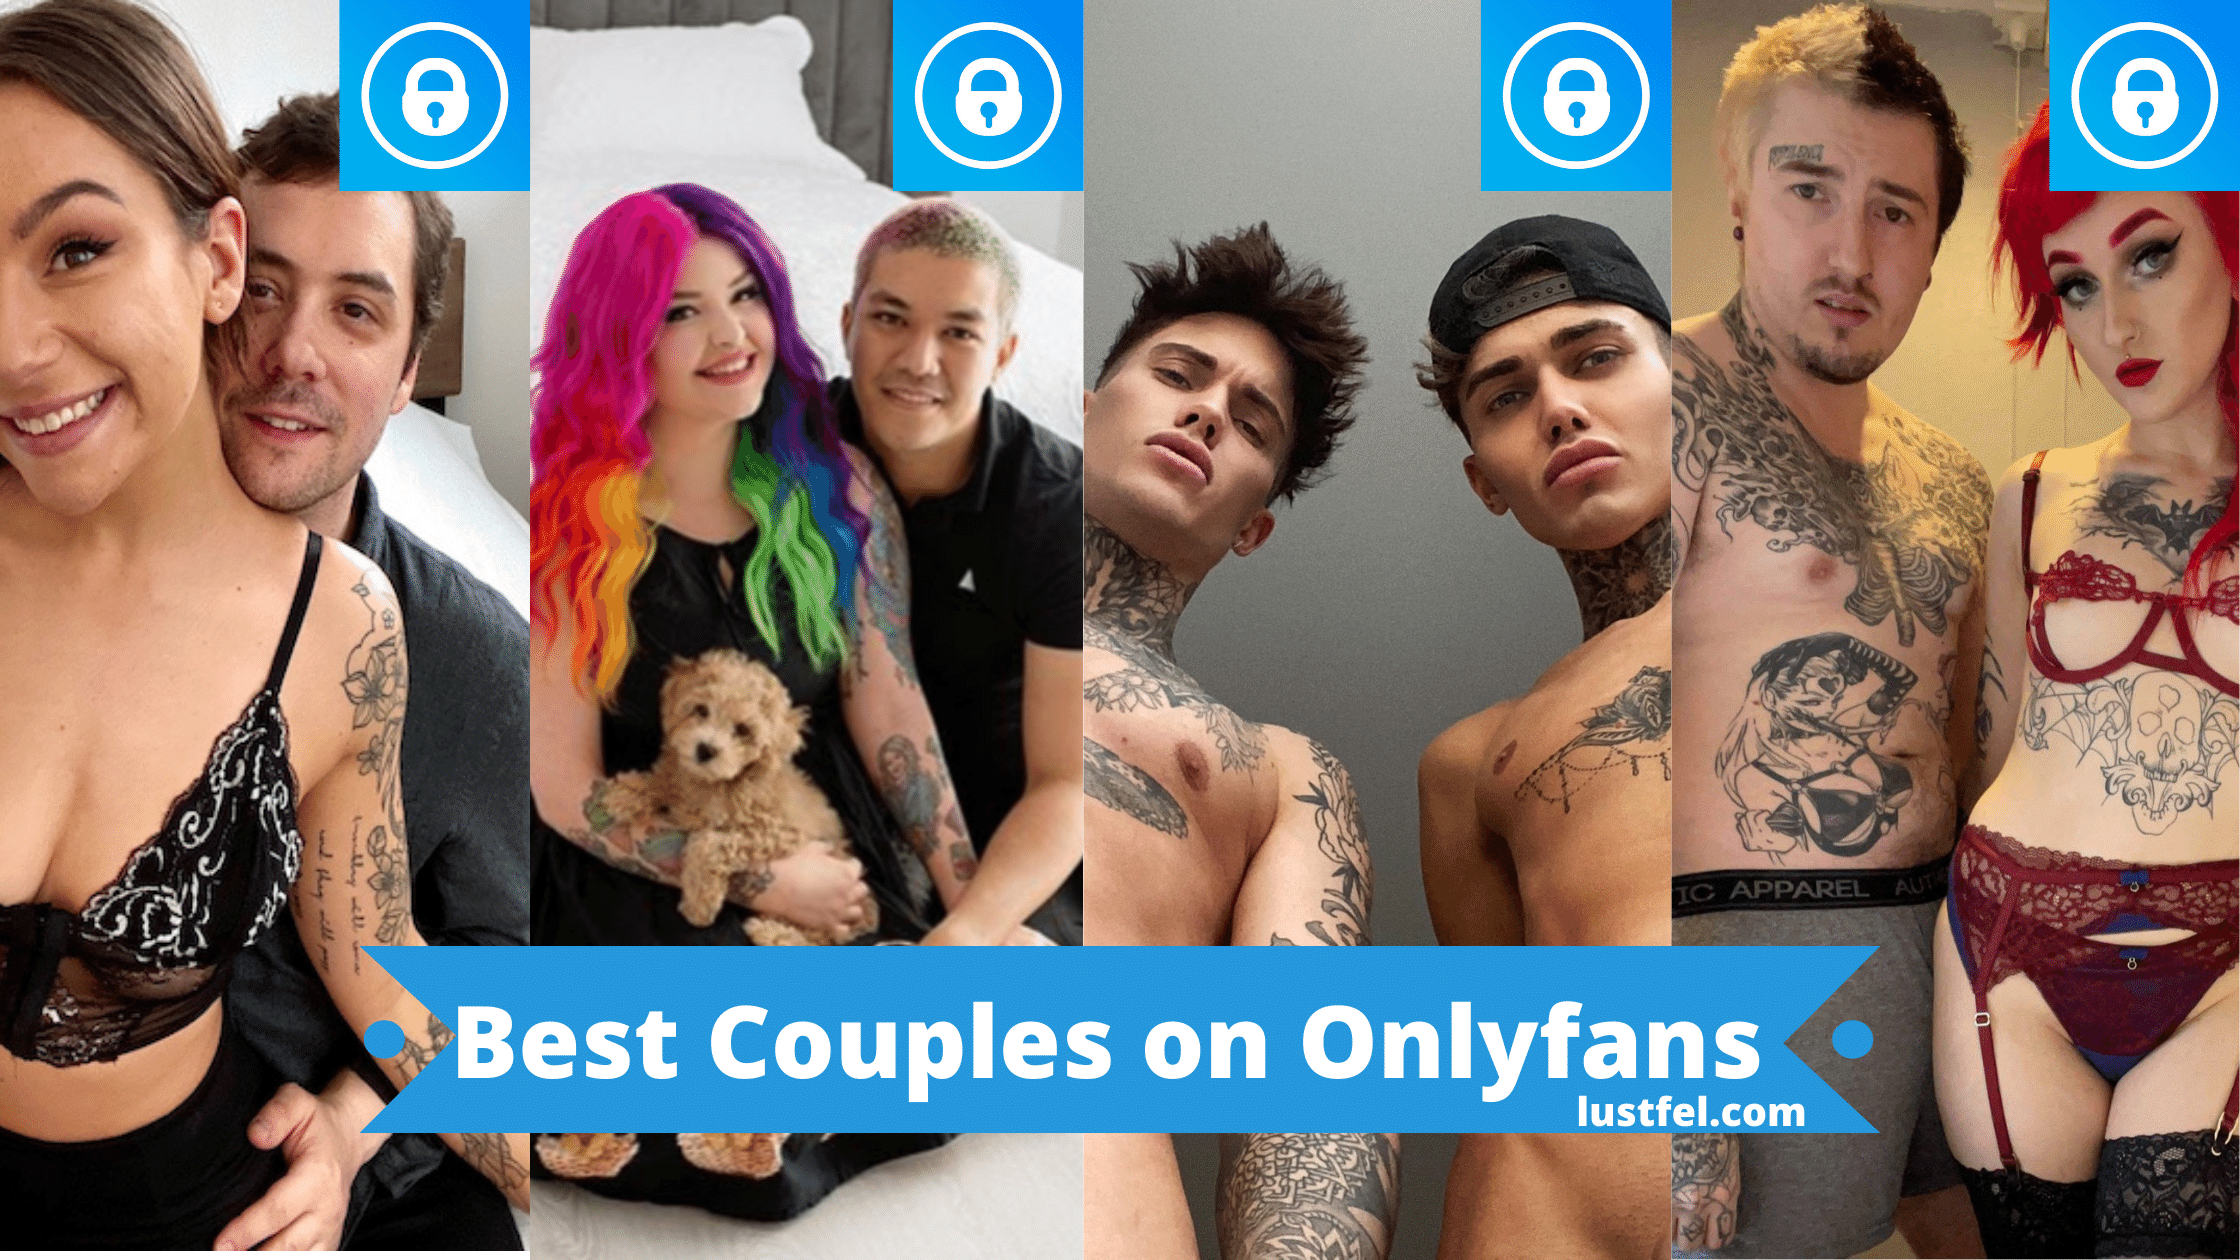 Couple only fans